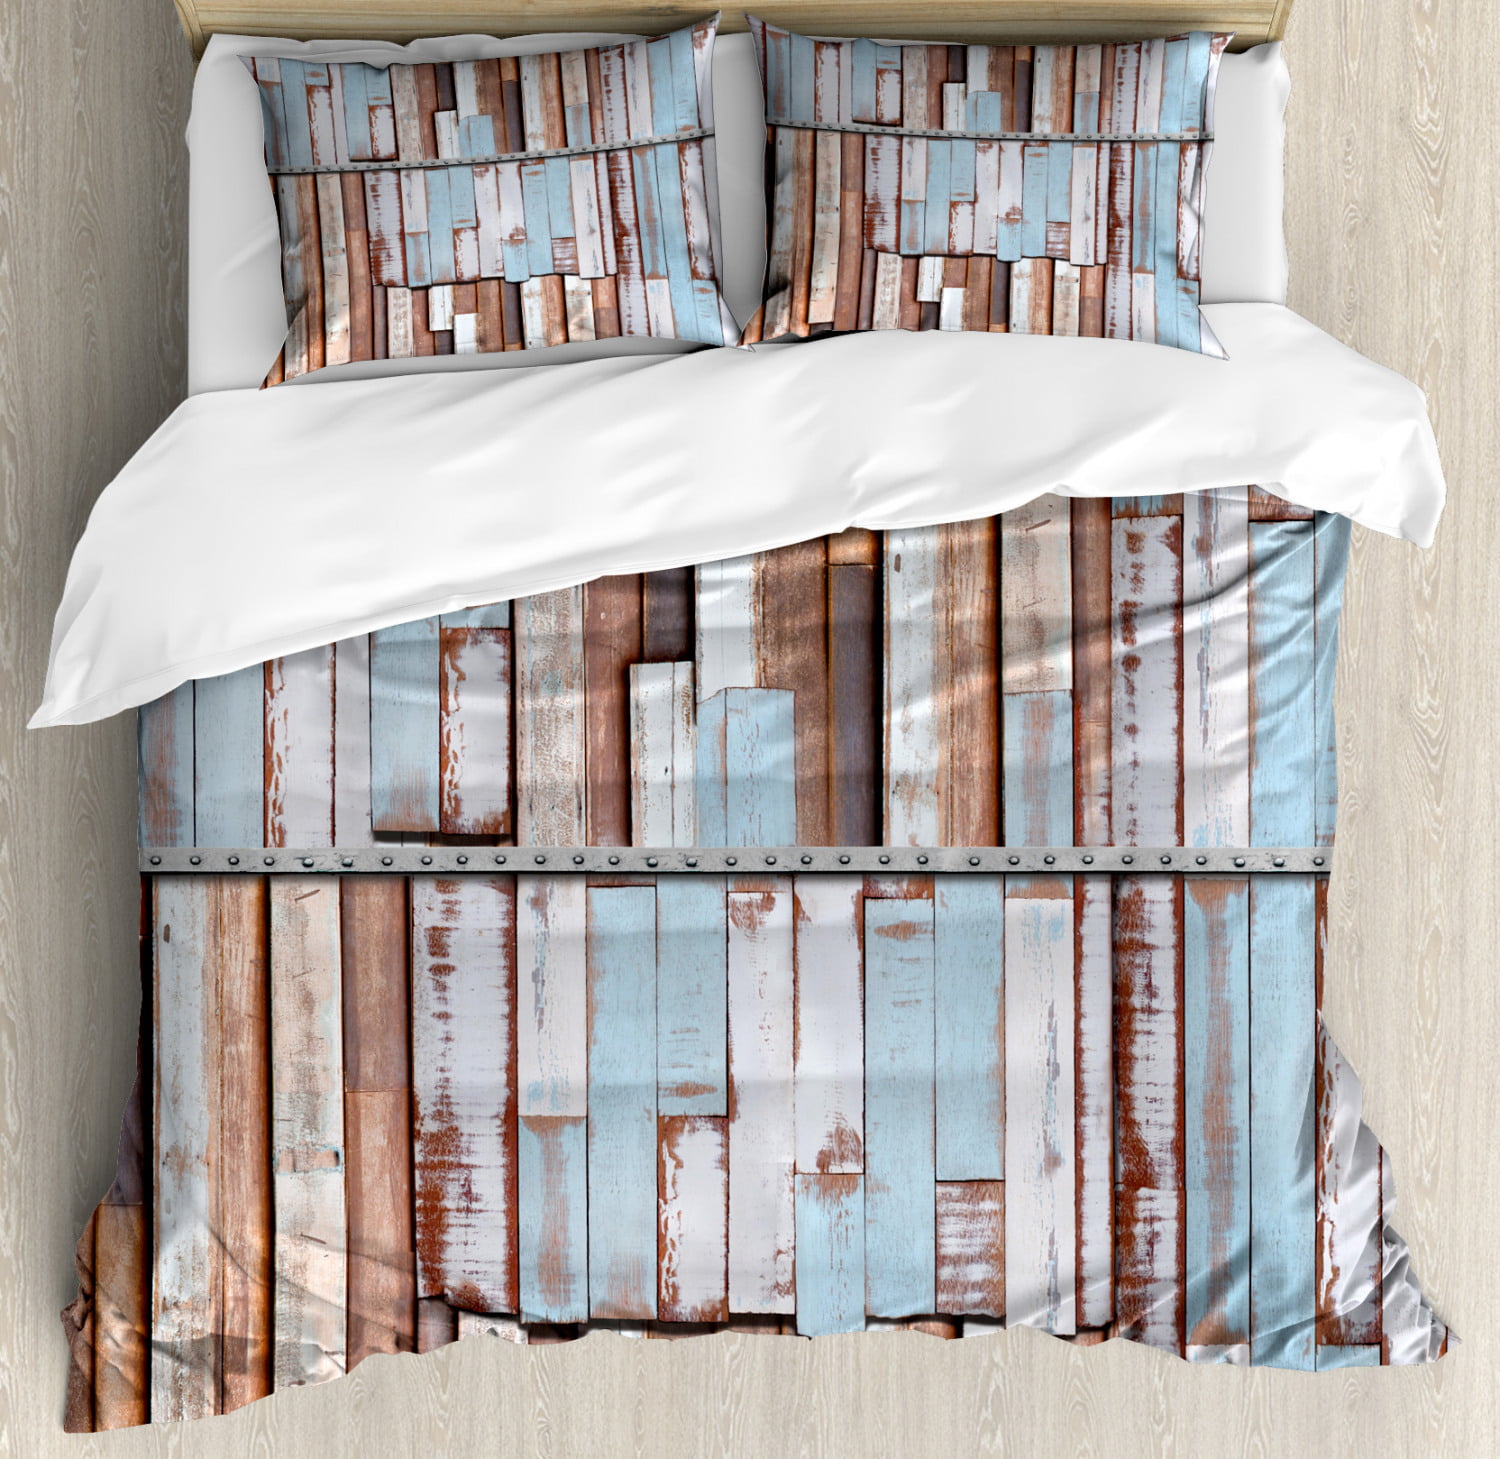 Rustic Duvet Cover Set Nautical Long Wooden Planks Tree Designs On With Rusty Screws Art Print Decorative Bedding Set With Pillow Shams Brown White And Blue By Ambesonne Walmart Com Walmart Com